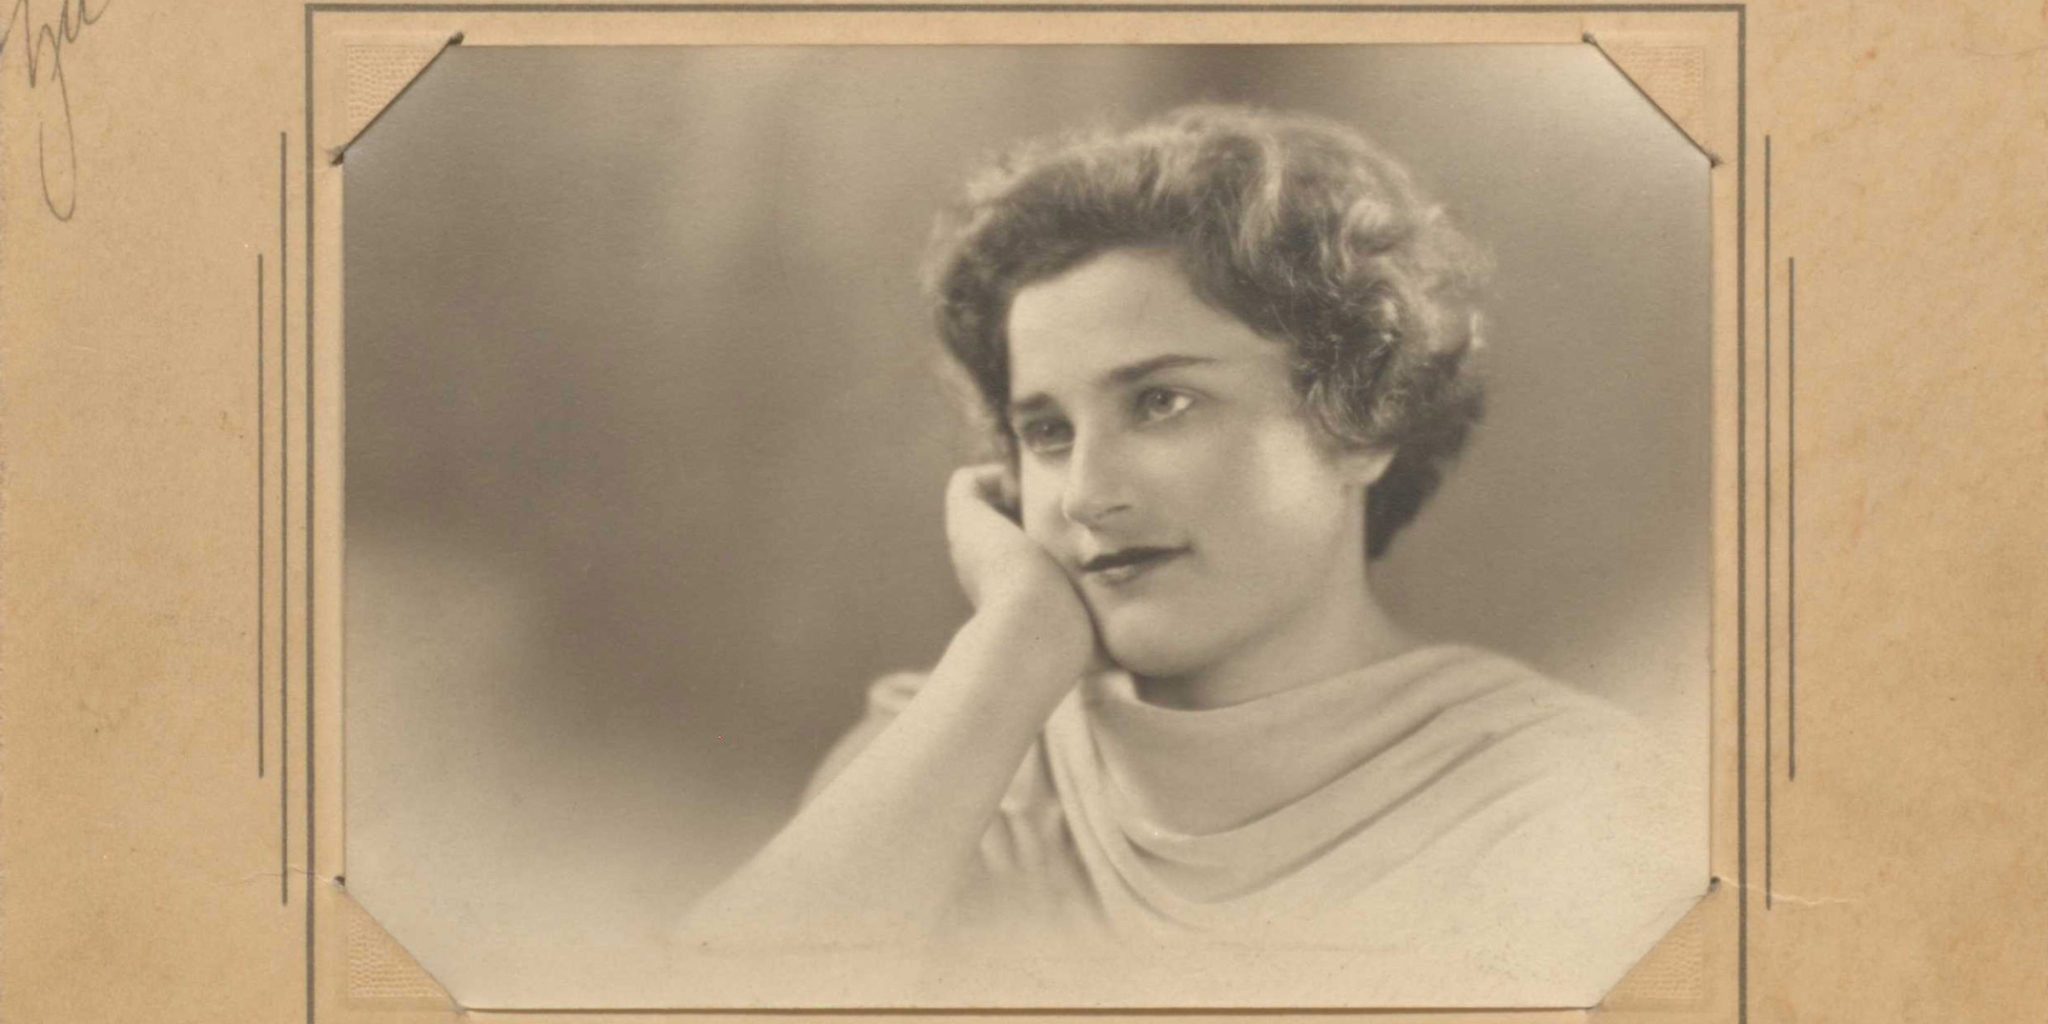 Portrait of Beatrice Gordon, inscribed to ("zu") Leonard Bernstein, ca. 1930s. Photo courtesy of the Library of Congress, Music Division. Click photo to view inscription.